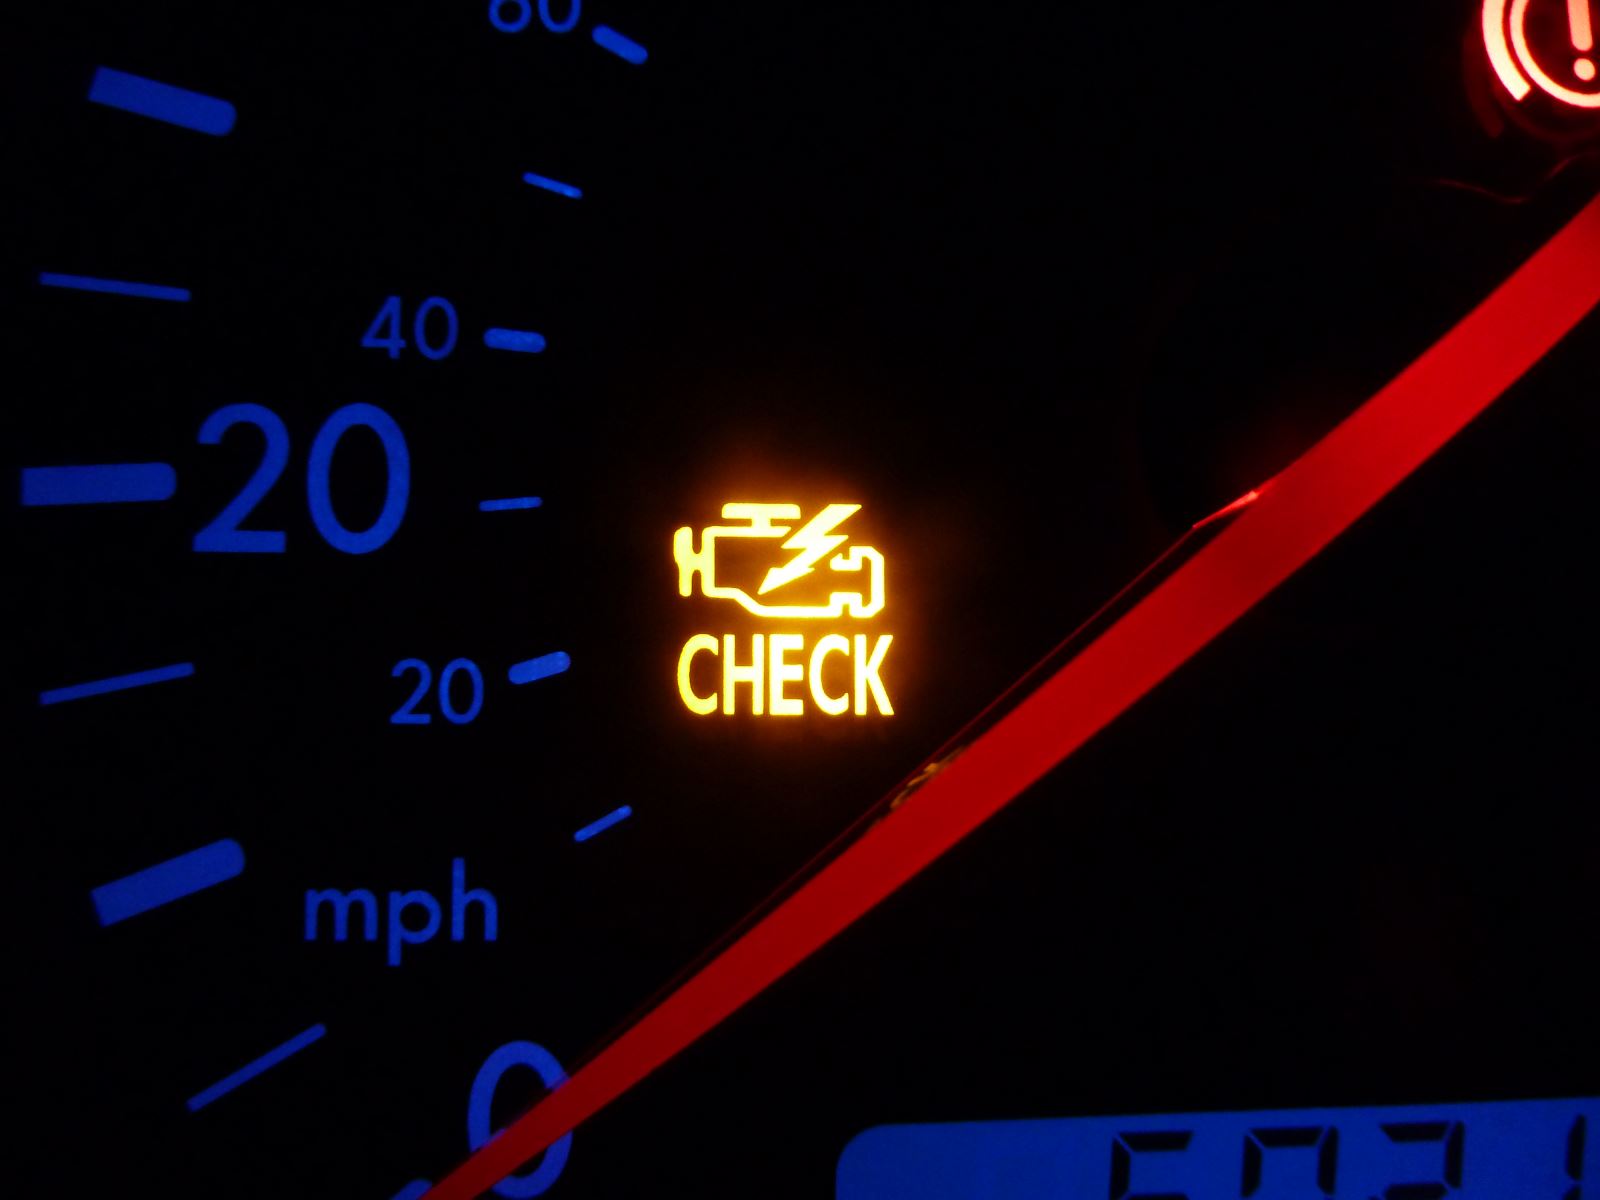 My Check Engine Light is flashing, what does this mean?